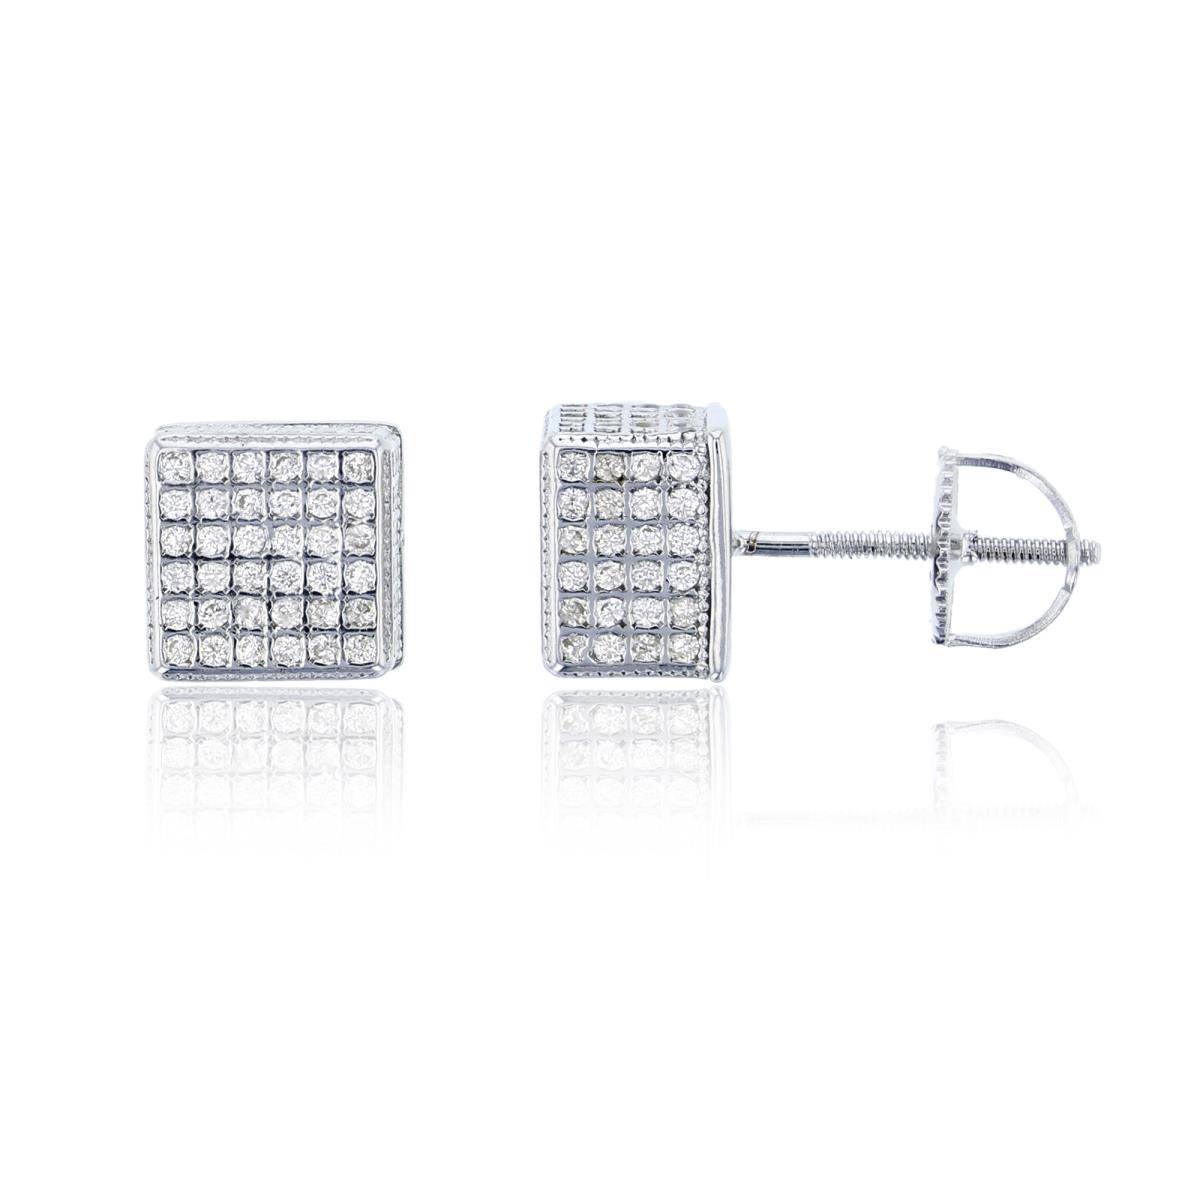 Sterling Silver 7x7mm Micropave 3D Square Screwback Stud Earring